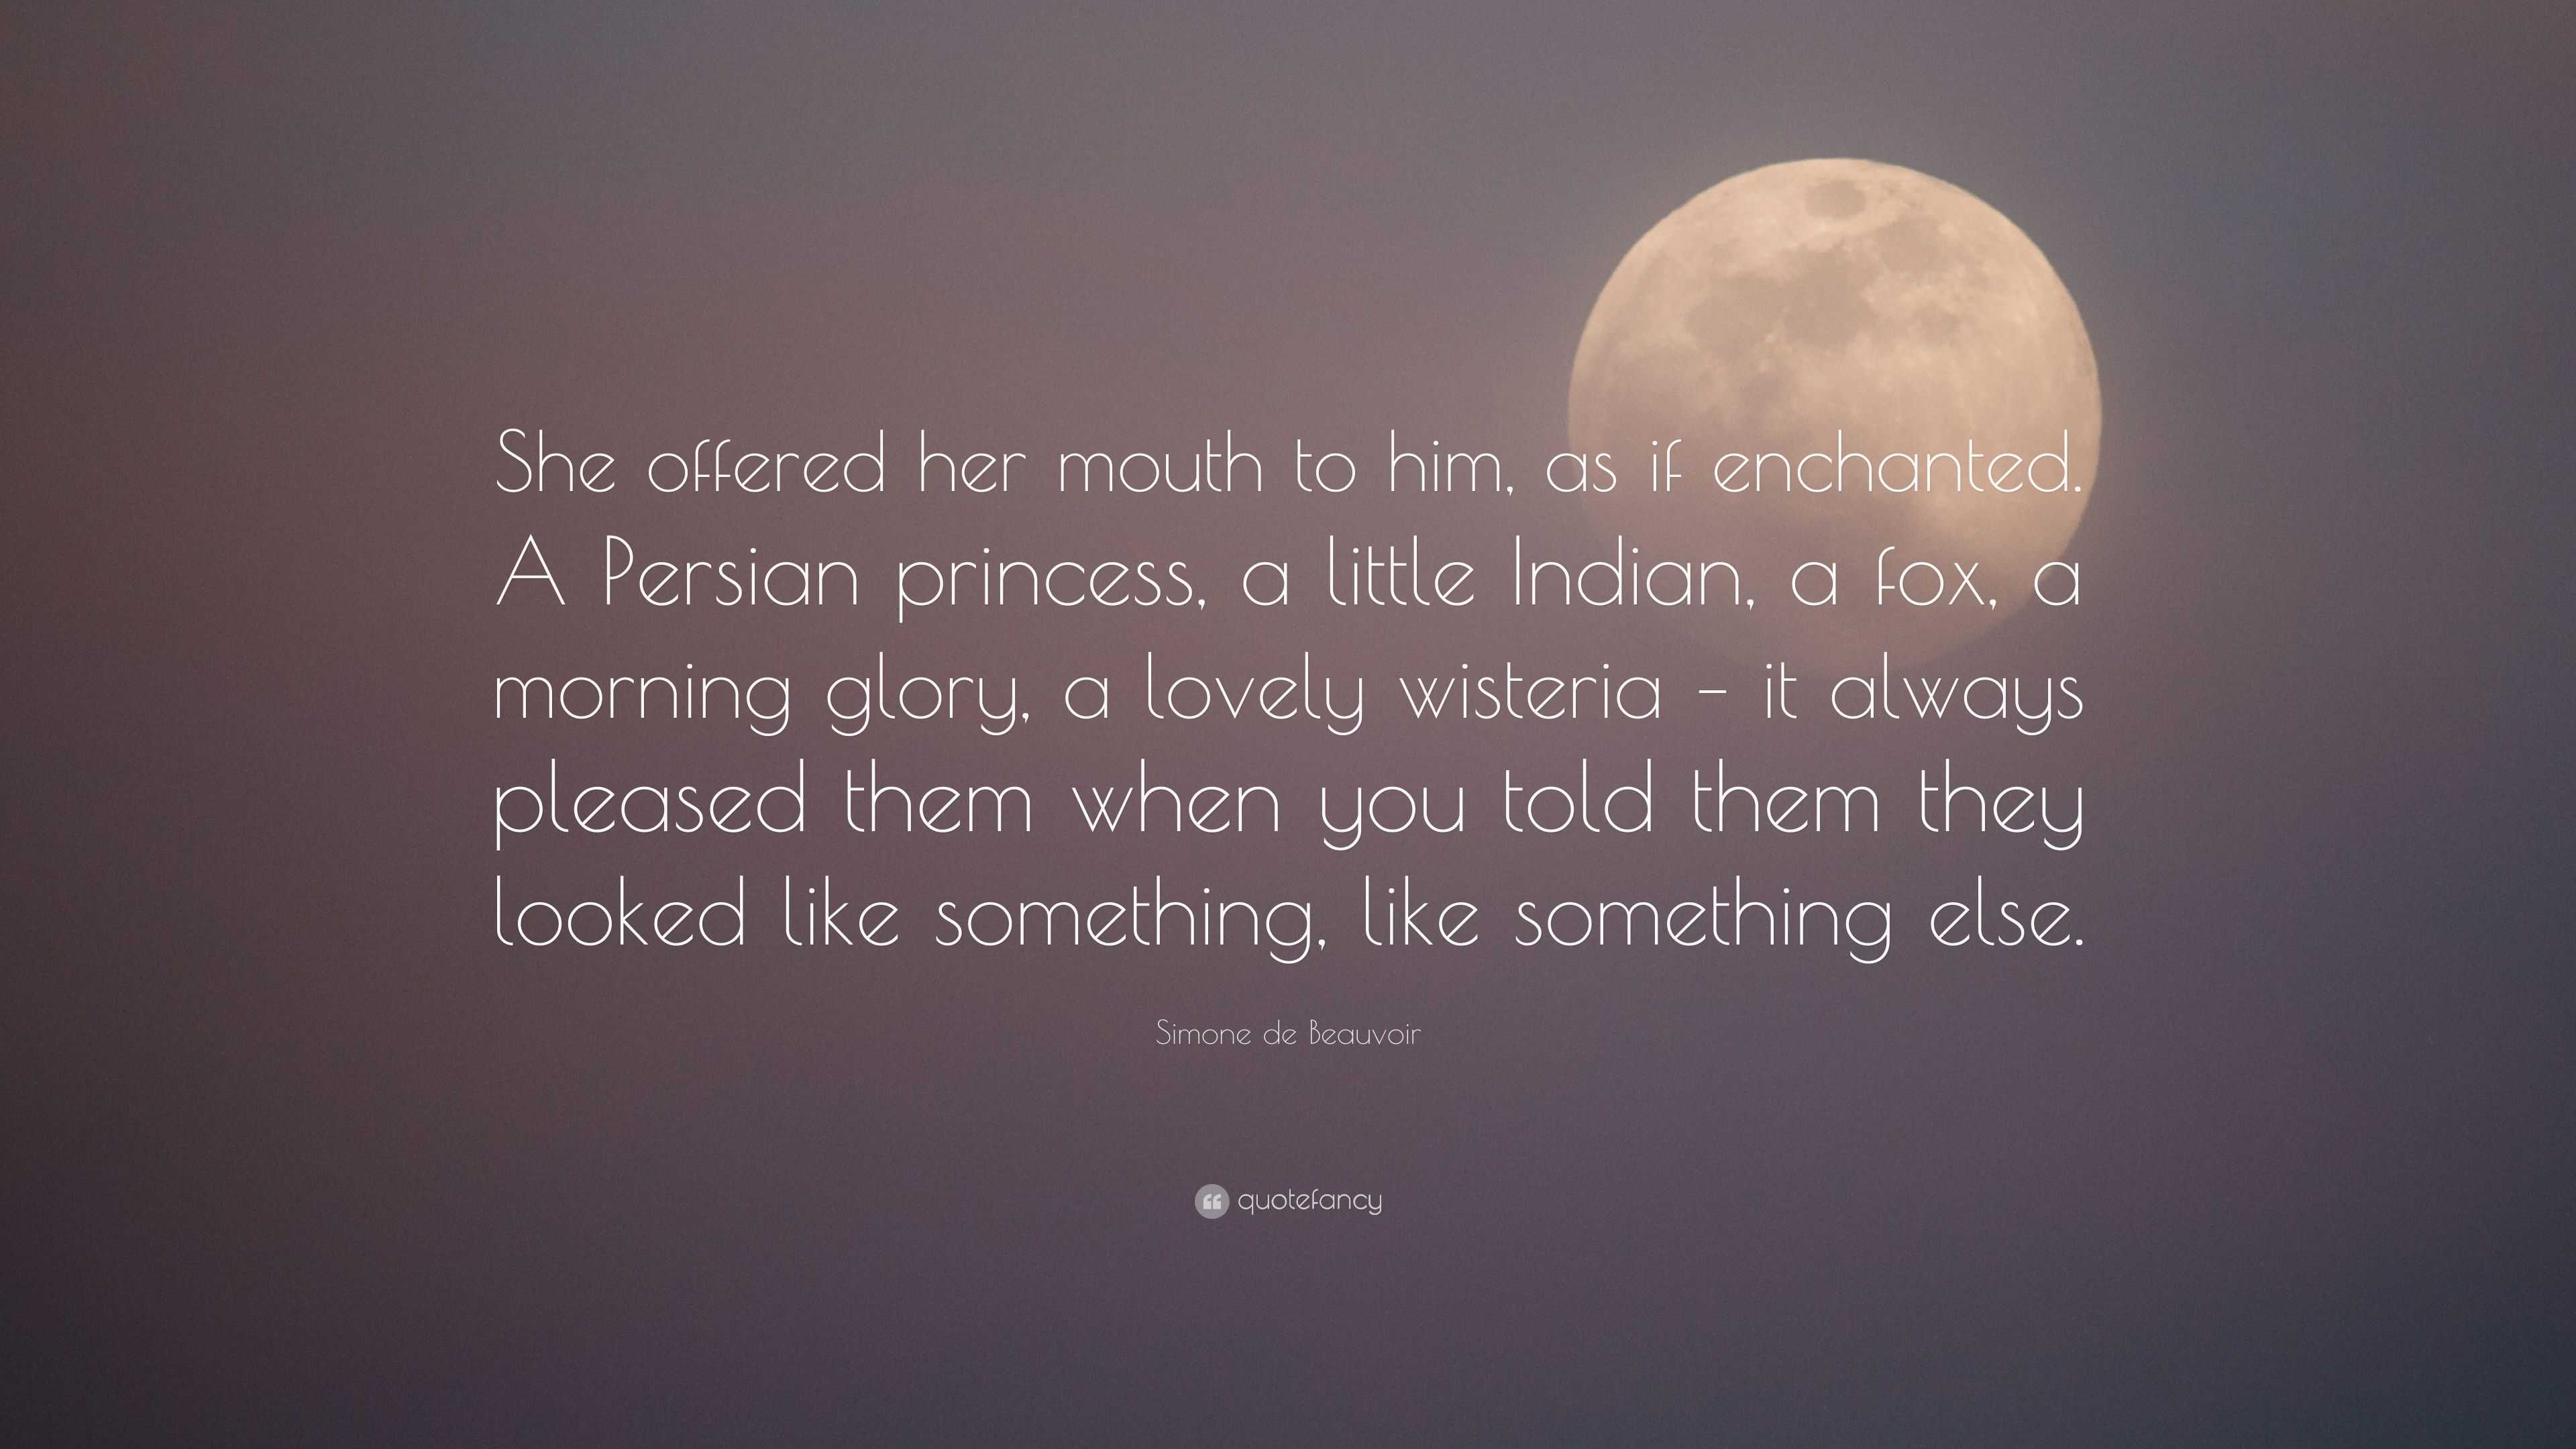 Simone de Beauvoir Quote: “She offered her mouth to him, as if ...